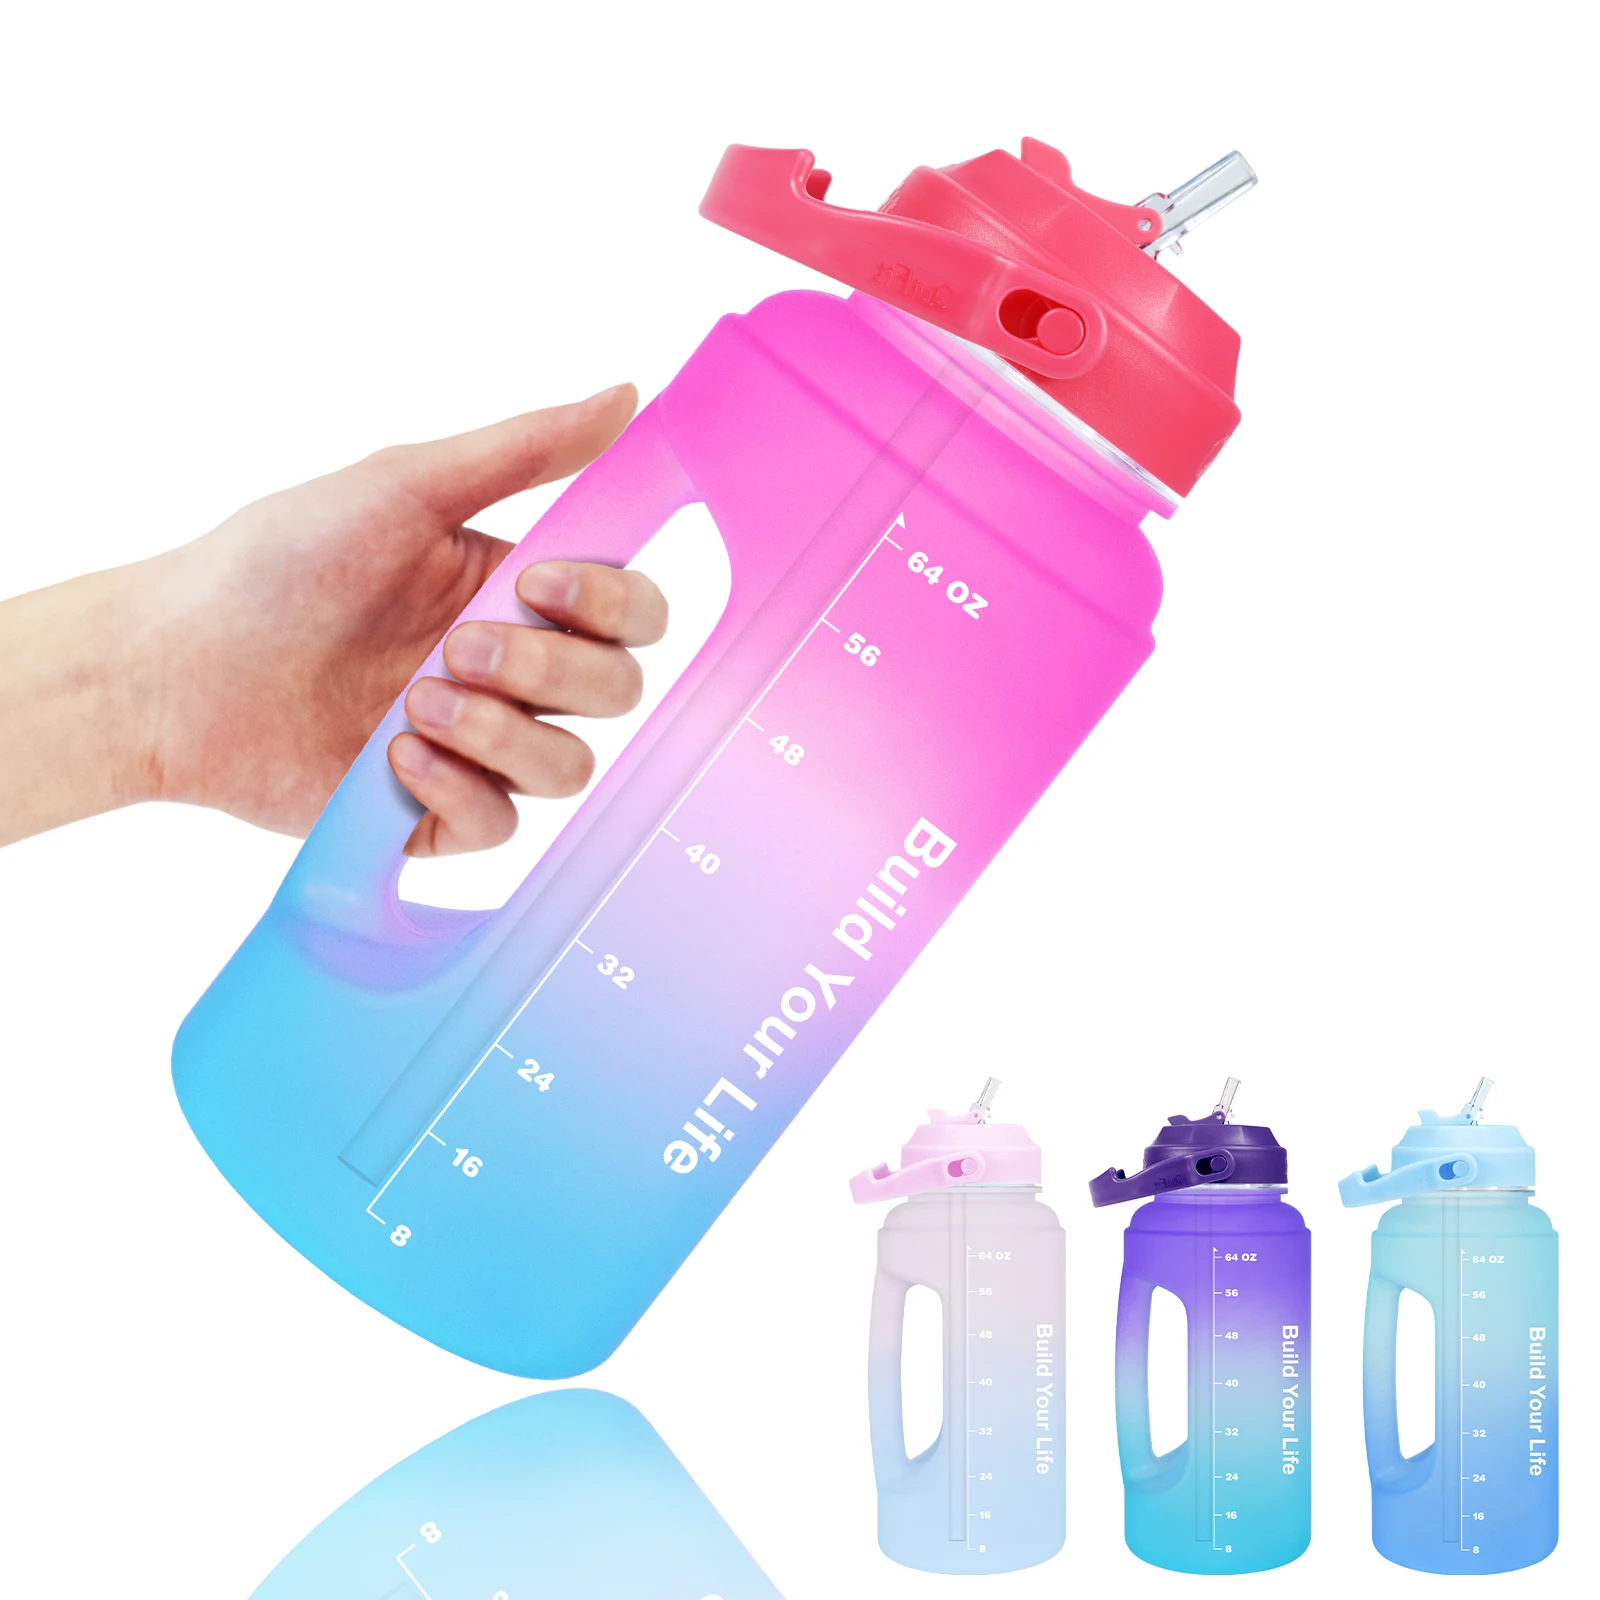 BuildLife Water Bottle with Straw PETG Food Grade BPA Free Drinking Jug Motivatinal Quote for Sports Outdoor Workout Hiking